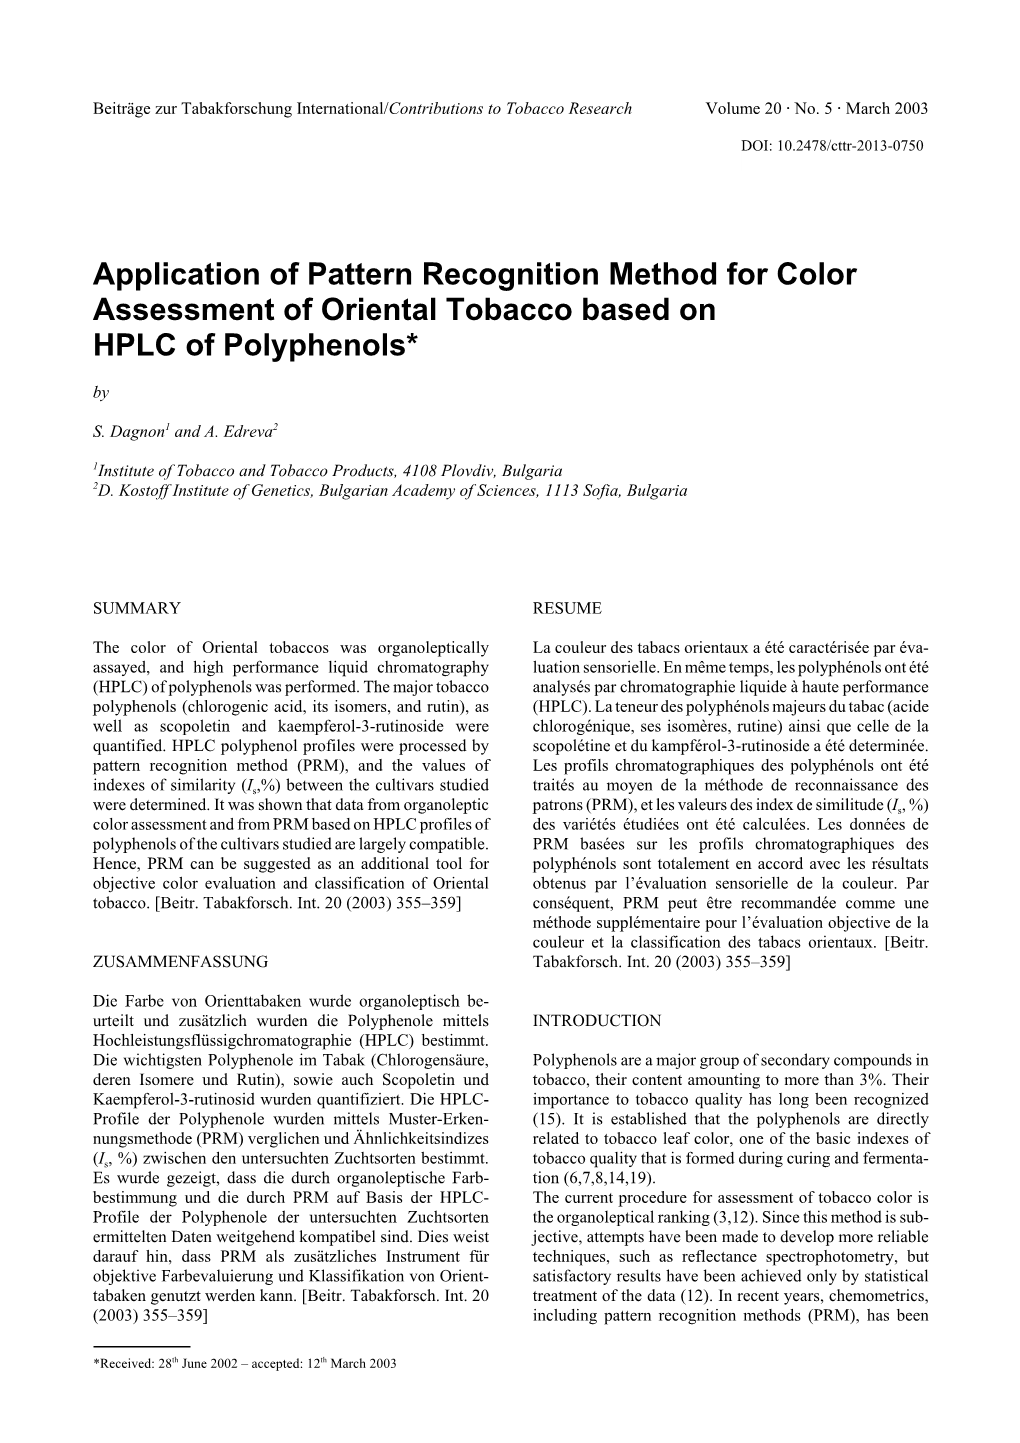 Application of Pattern Recognition Method for Color Assessment of Oriental Tobacco Based on HPLC of Polyphenols* By